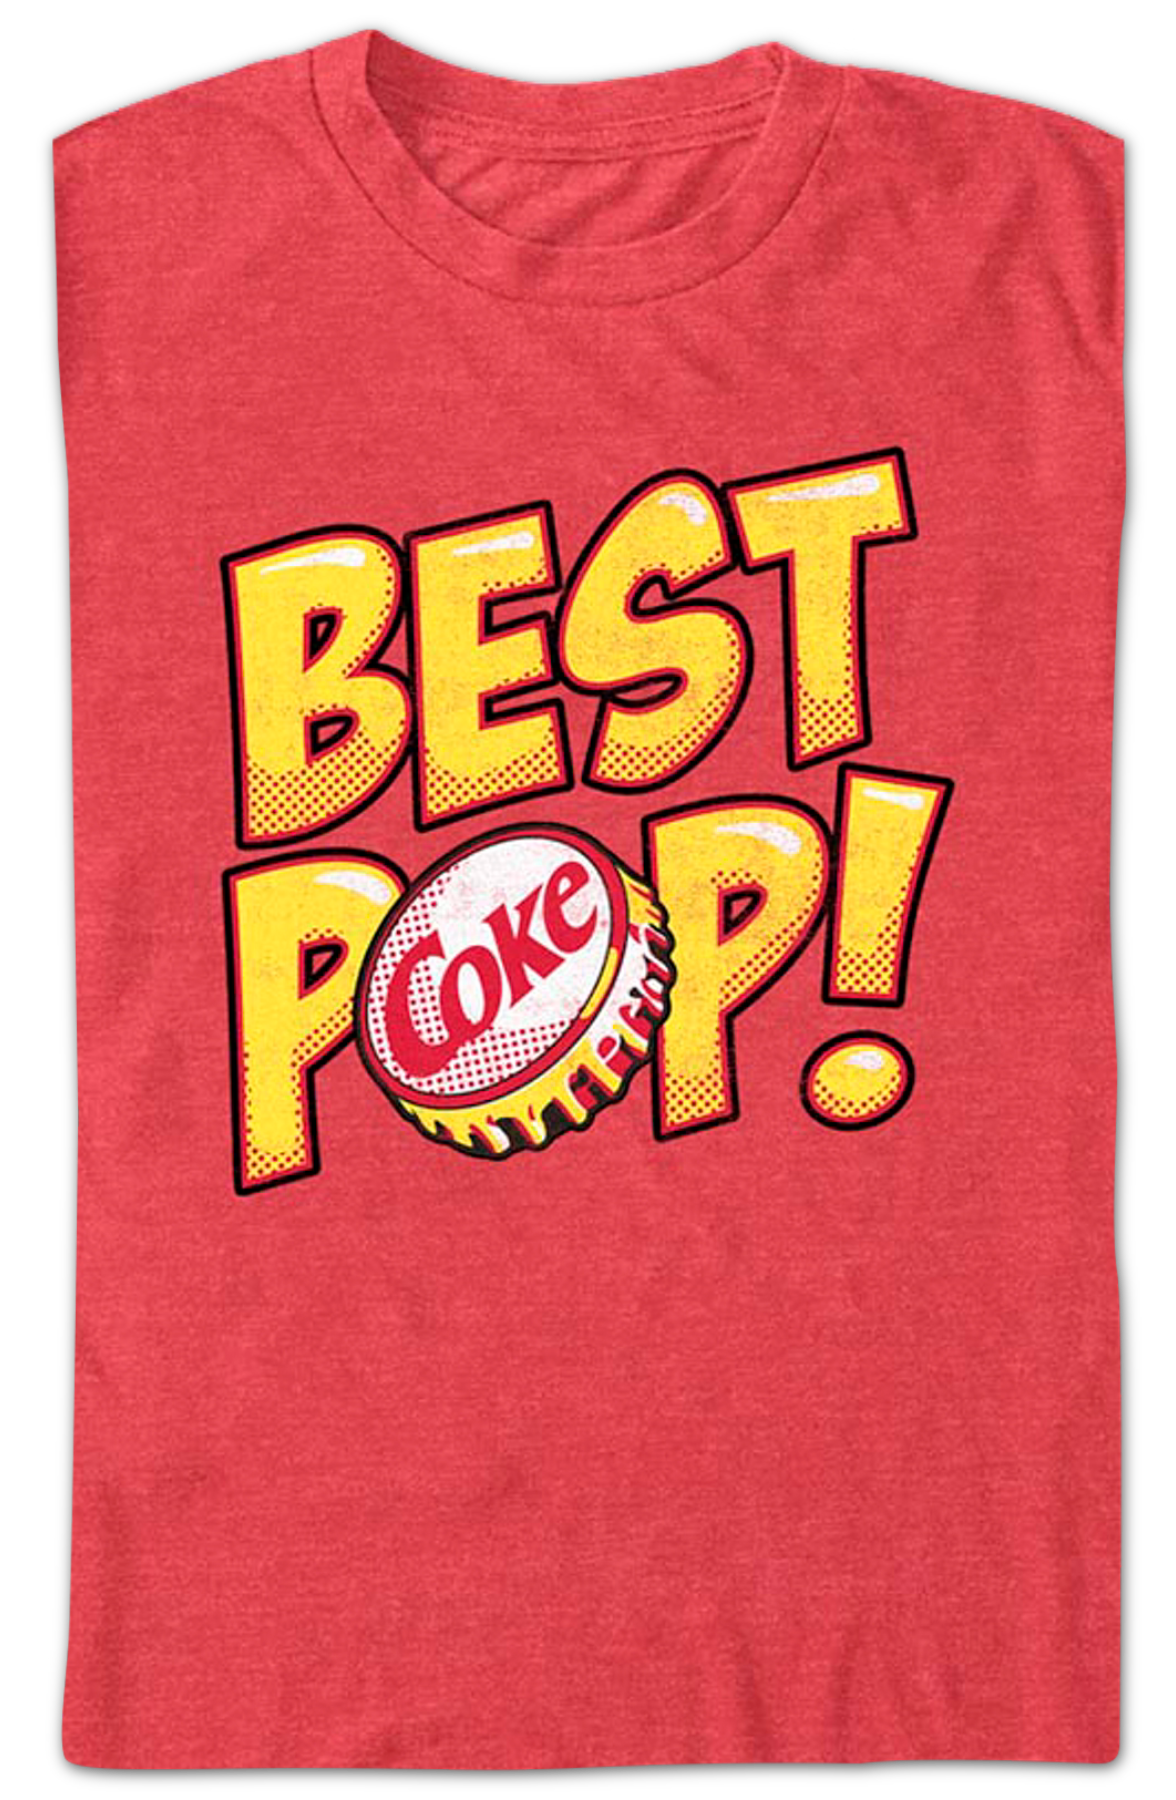 Best Pop Father's Day Coca-Cola T-Shirt